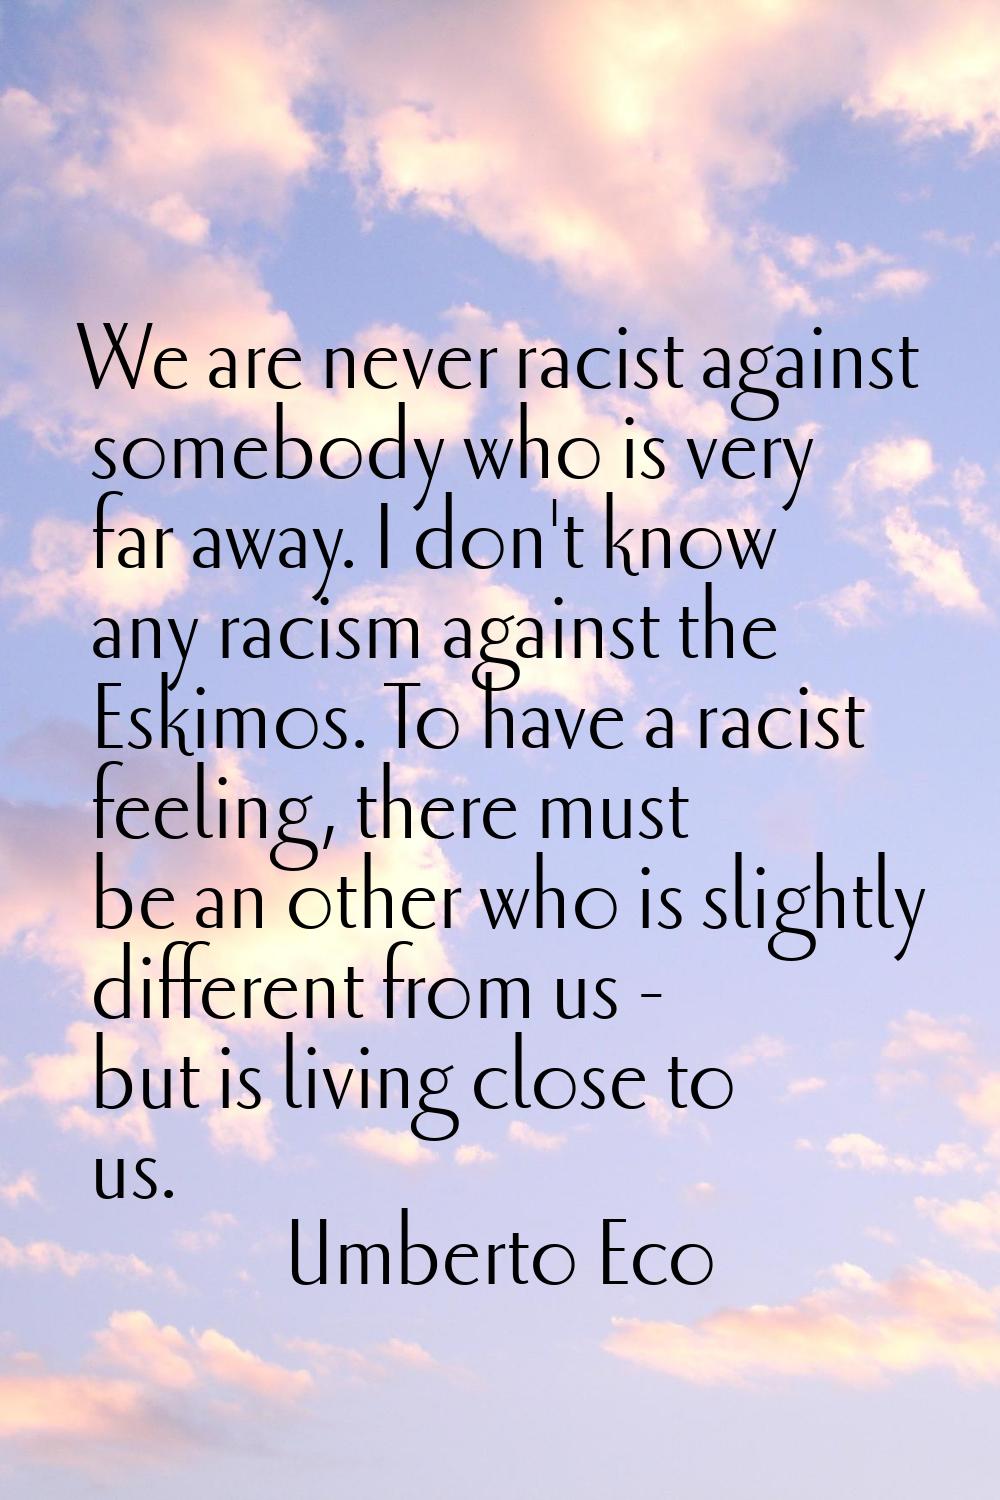 We are never racist against somebody who is very far away. I don't know any racism against the Eski